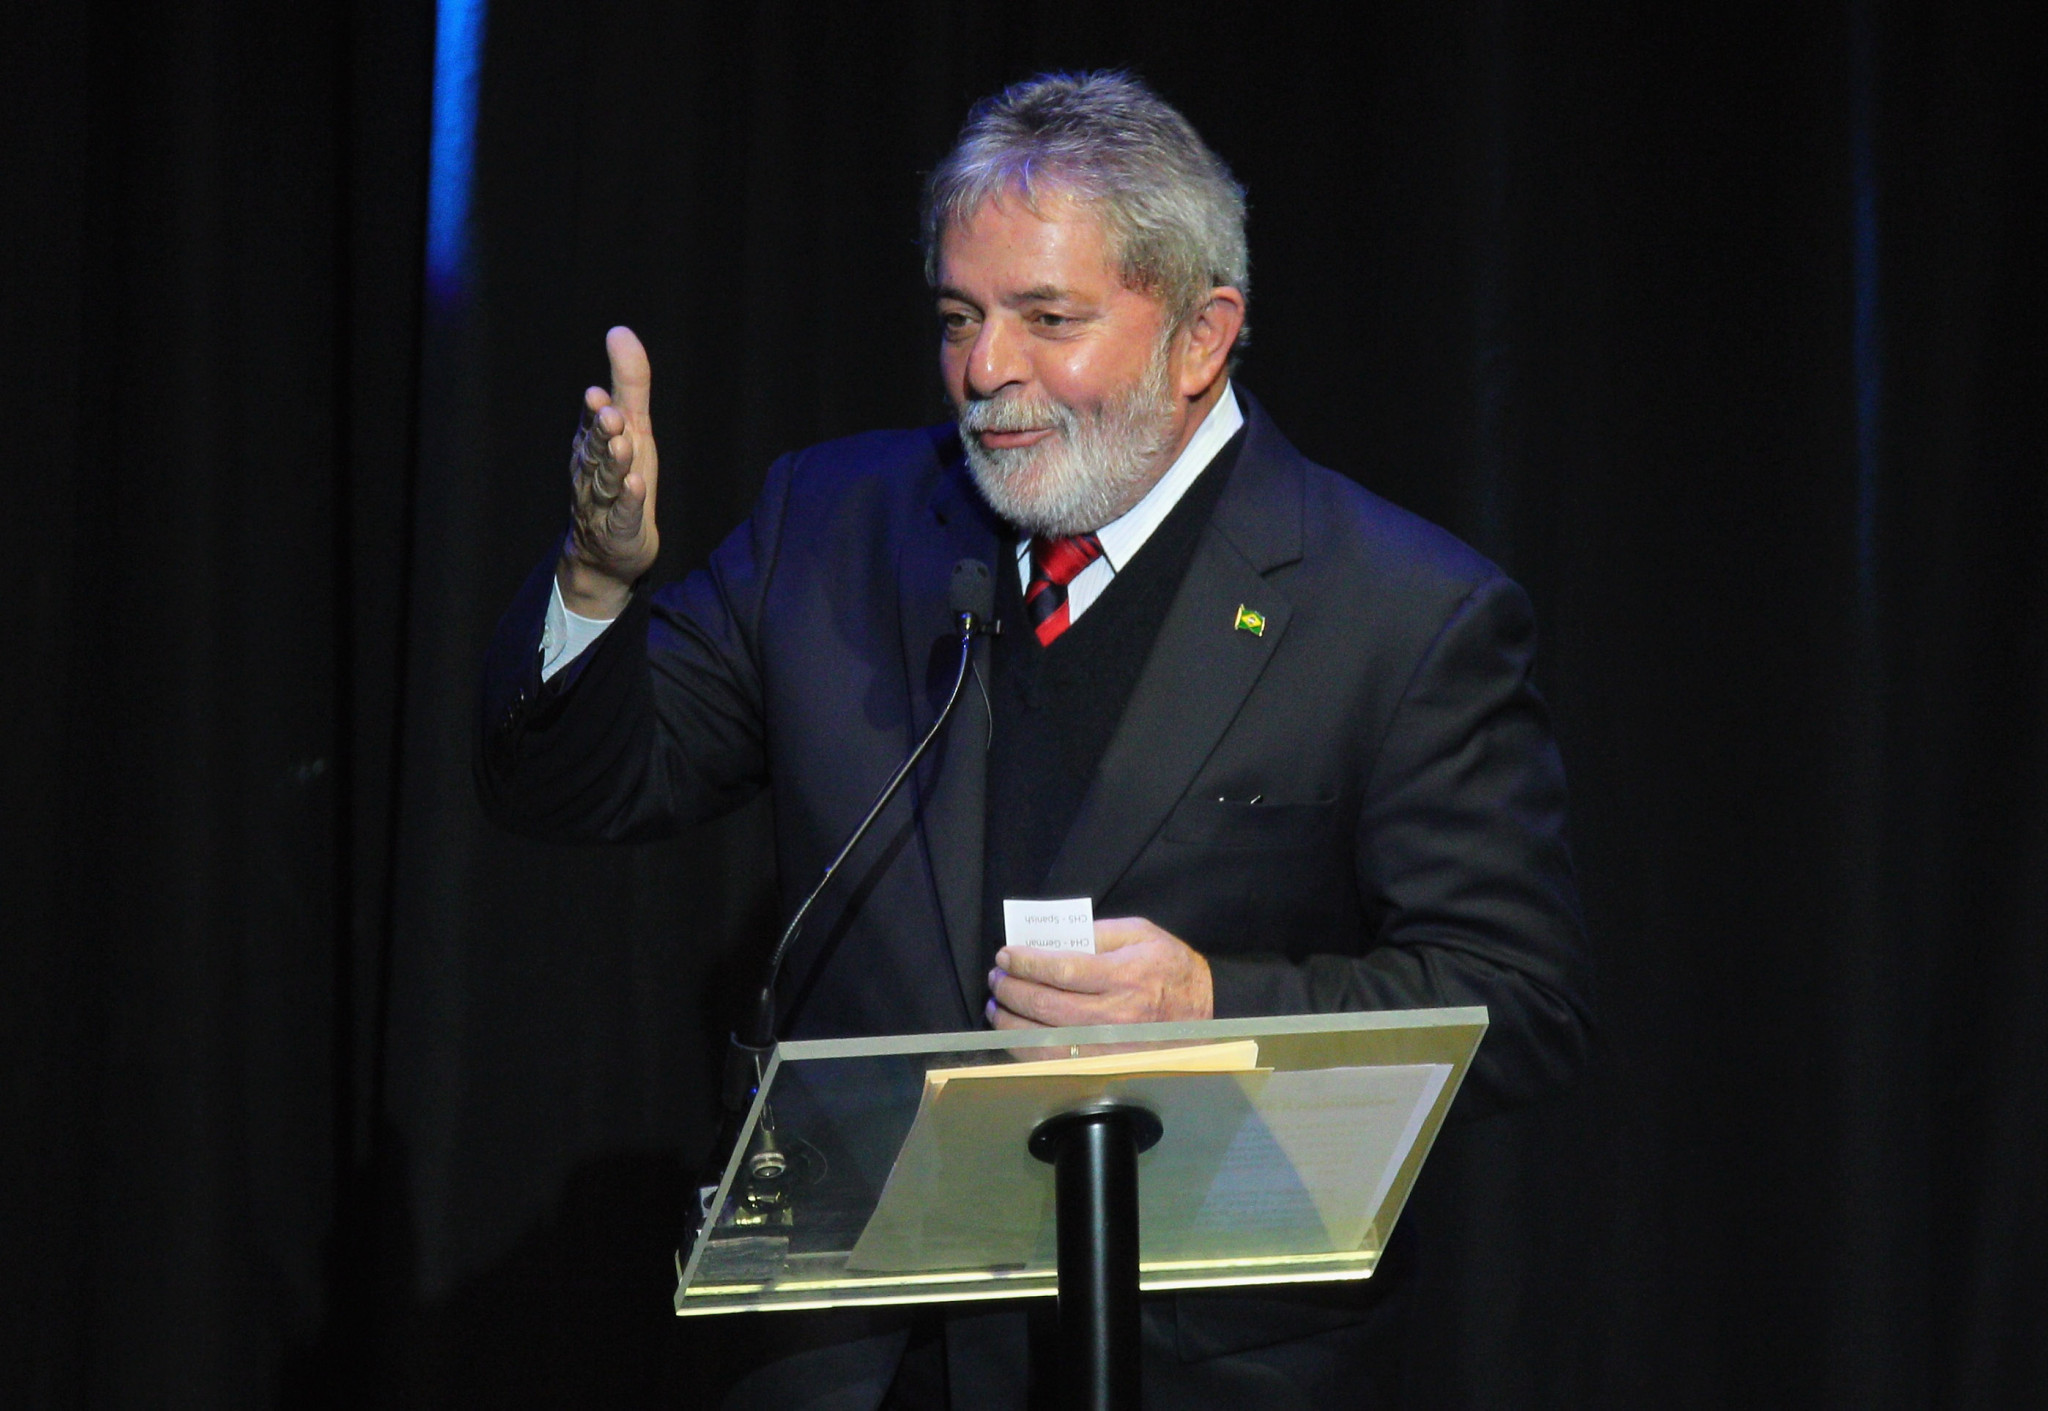 Lula re-elected Brazilian President in historic triumph 13 years after leading successful Rio 2016 bid